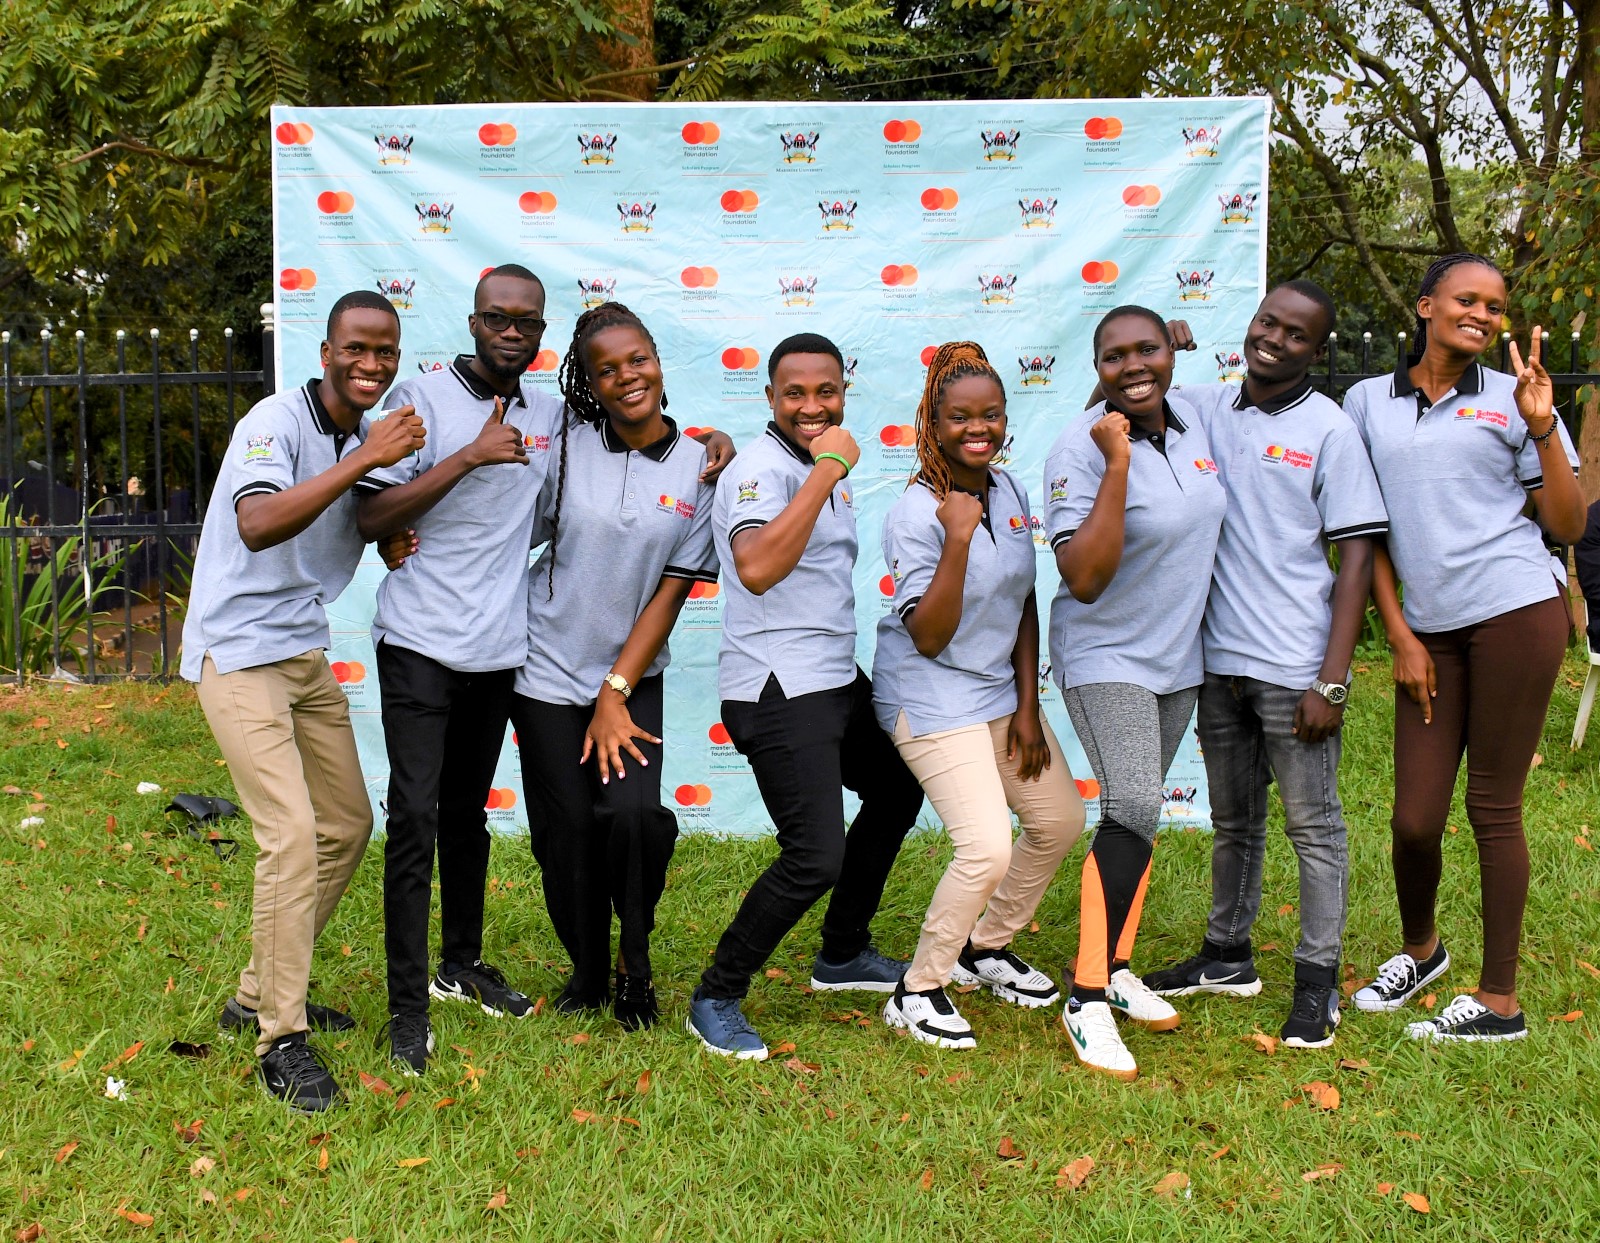 Some of the alumni who graced the Annual Community Open Day show their passion. Mastercard Foundation Scholars Program Annual Community Open Day, 2nd September 2023, Freedom Square, Makerere University, Kampala Uganda, East Africa.